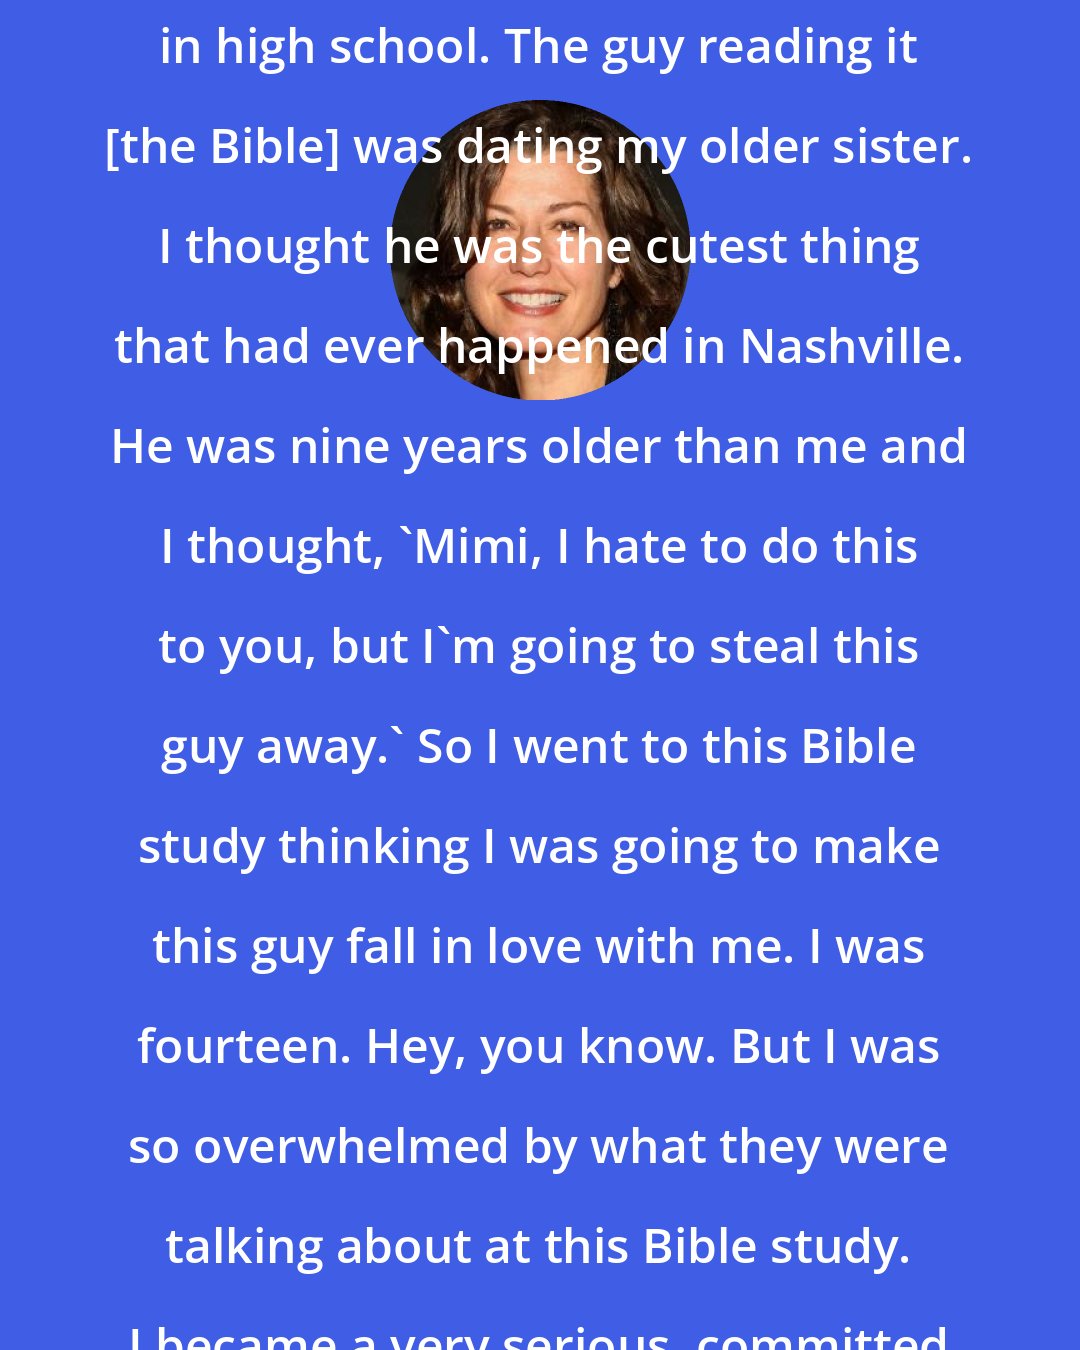 Amy Grant: That happened when I was a freshman in high school. The guy reading it [the Bible] was dating my older sister. I thought he was the cutest thing that had ever happened in Nashville. He was nine years older than me and I thought, 'Mimi, I hate to do this to you, but I'm going to steal this guy away.' So I went to this Bible study thinking I was going to make this guy fall in love with me. I was fourteen. Hey, you know. But I was so overwhelmed by what they were talking about at this Bible study. I became a very serious, committed Christian.